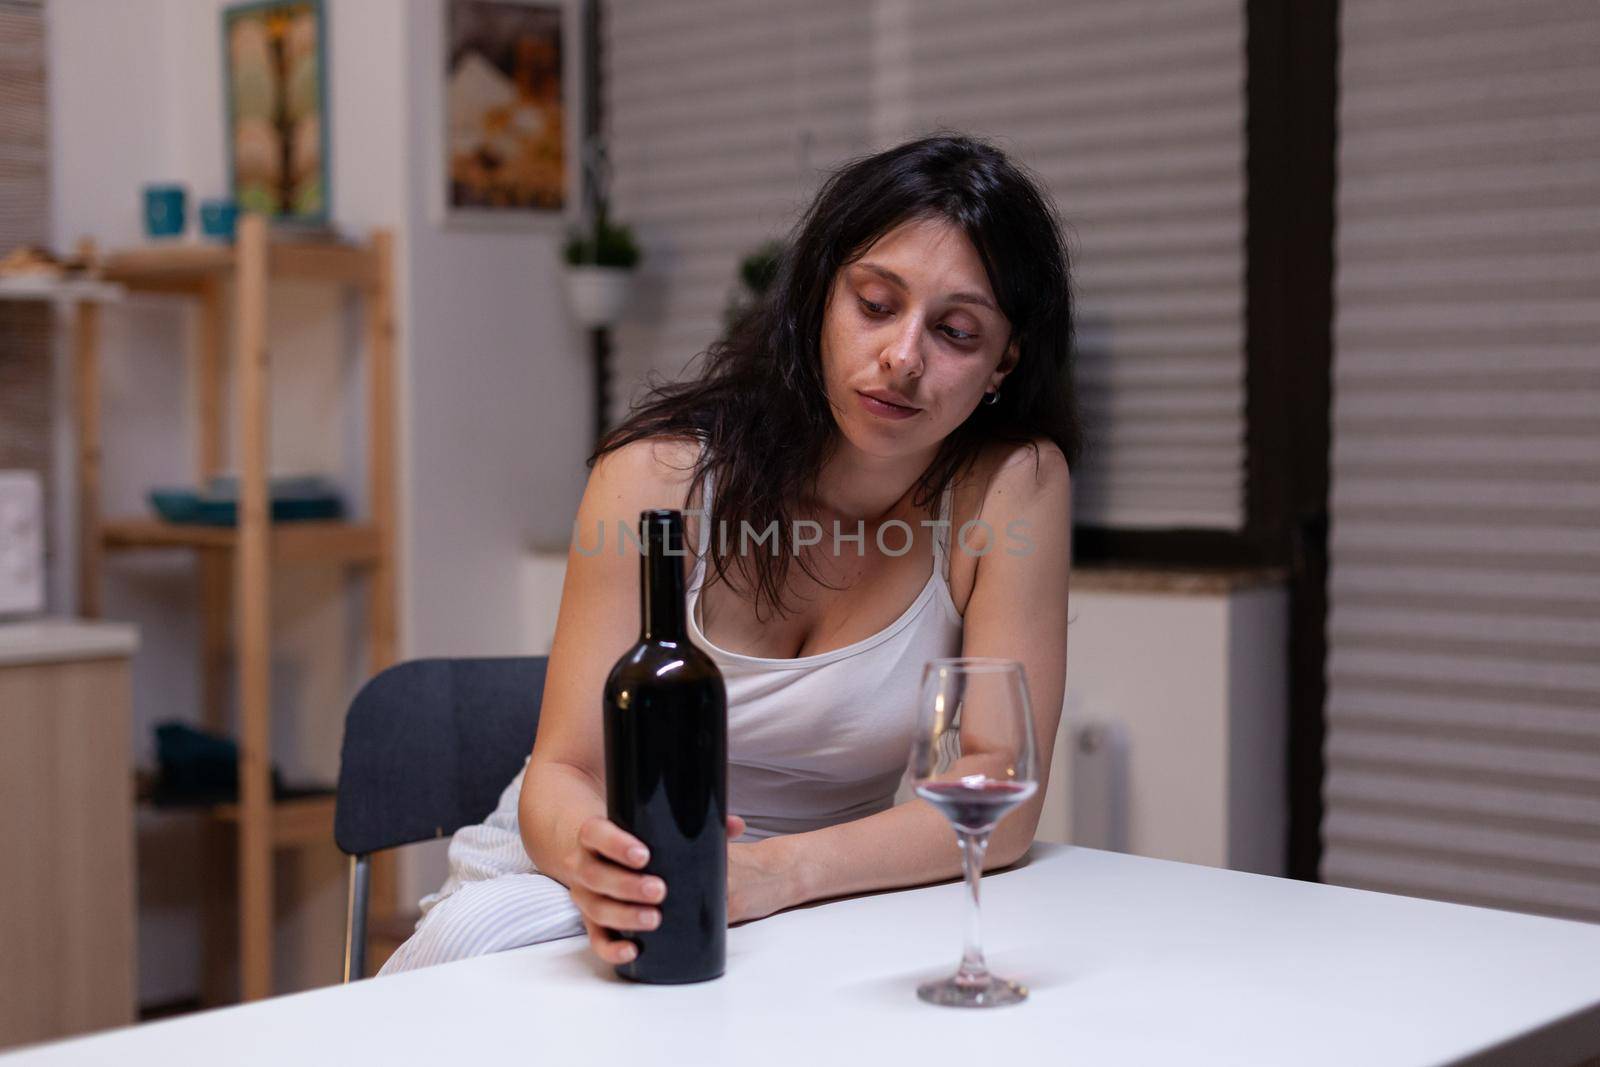 Unhappy woman with alcohol addiction drinking wine alone feeling depressed and intoxicated. Young adult with bottle of wine and glass using liquor for sadness, loneliness and desperation